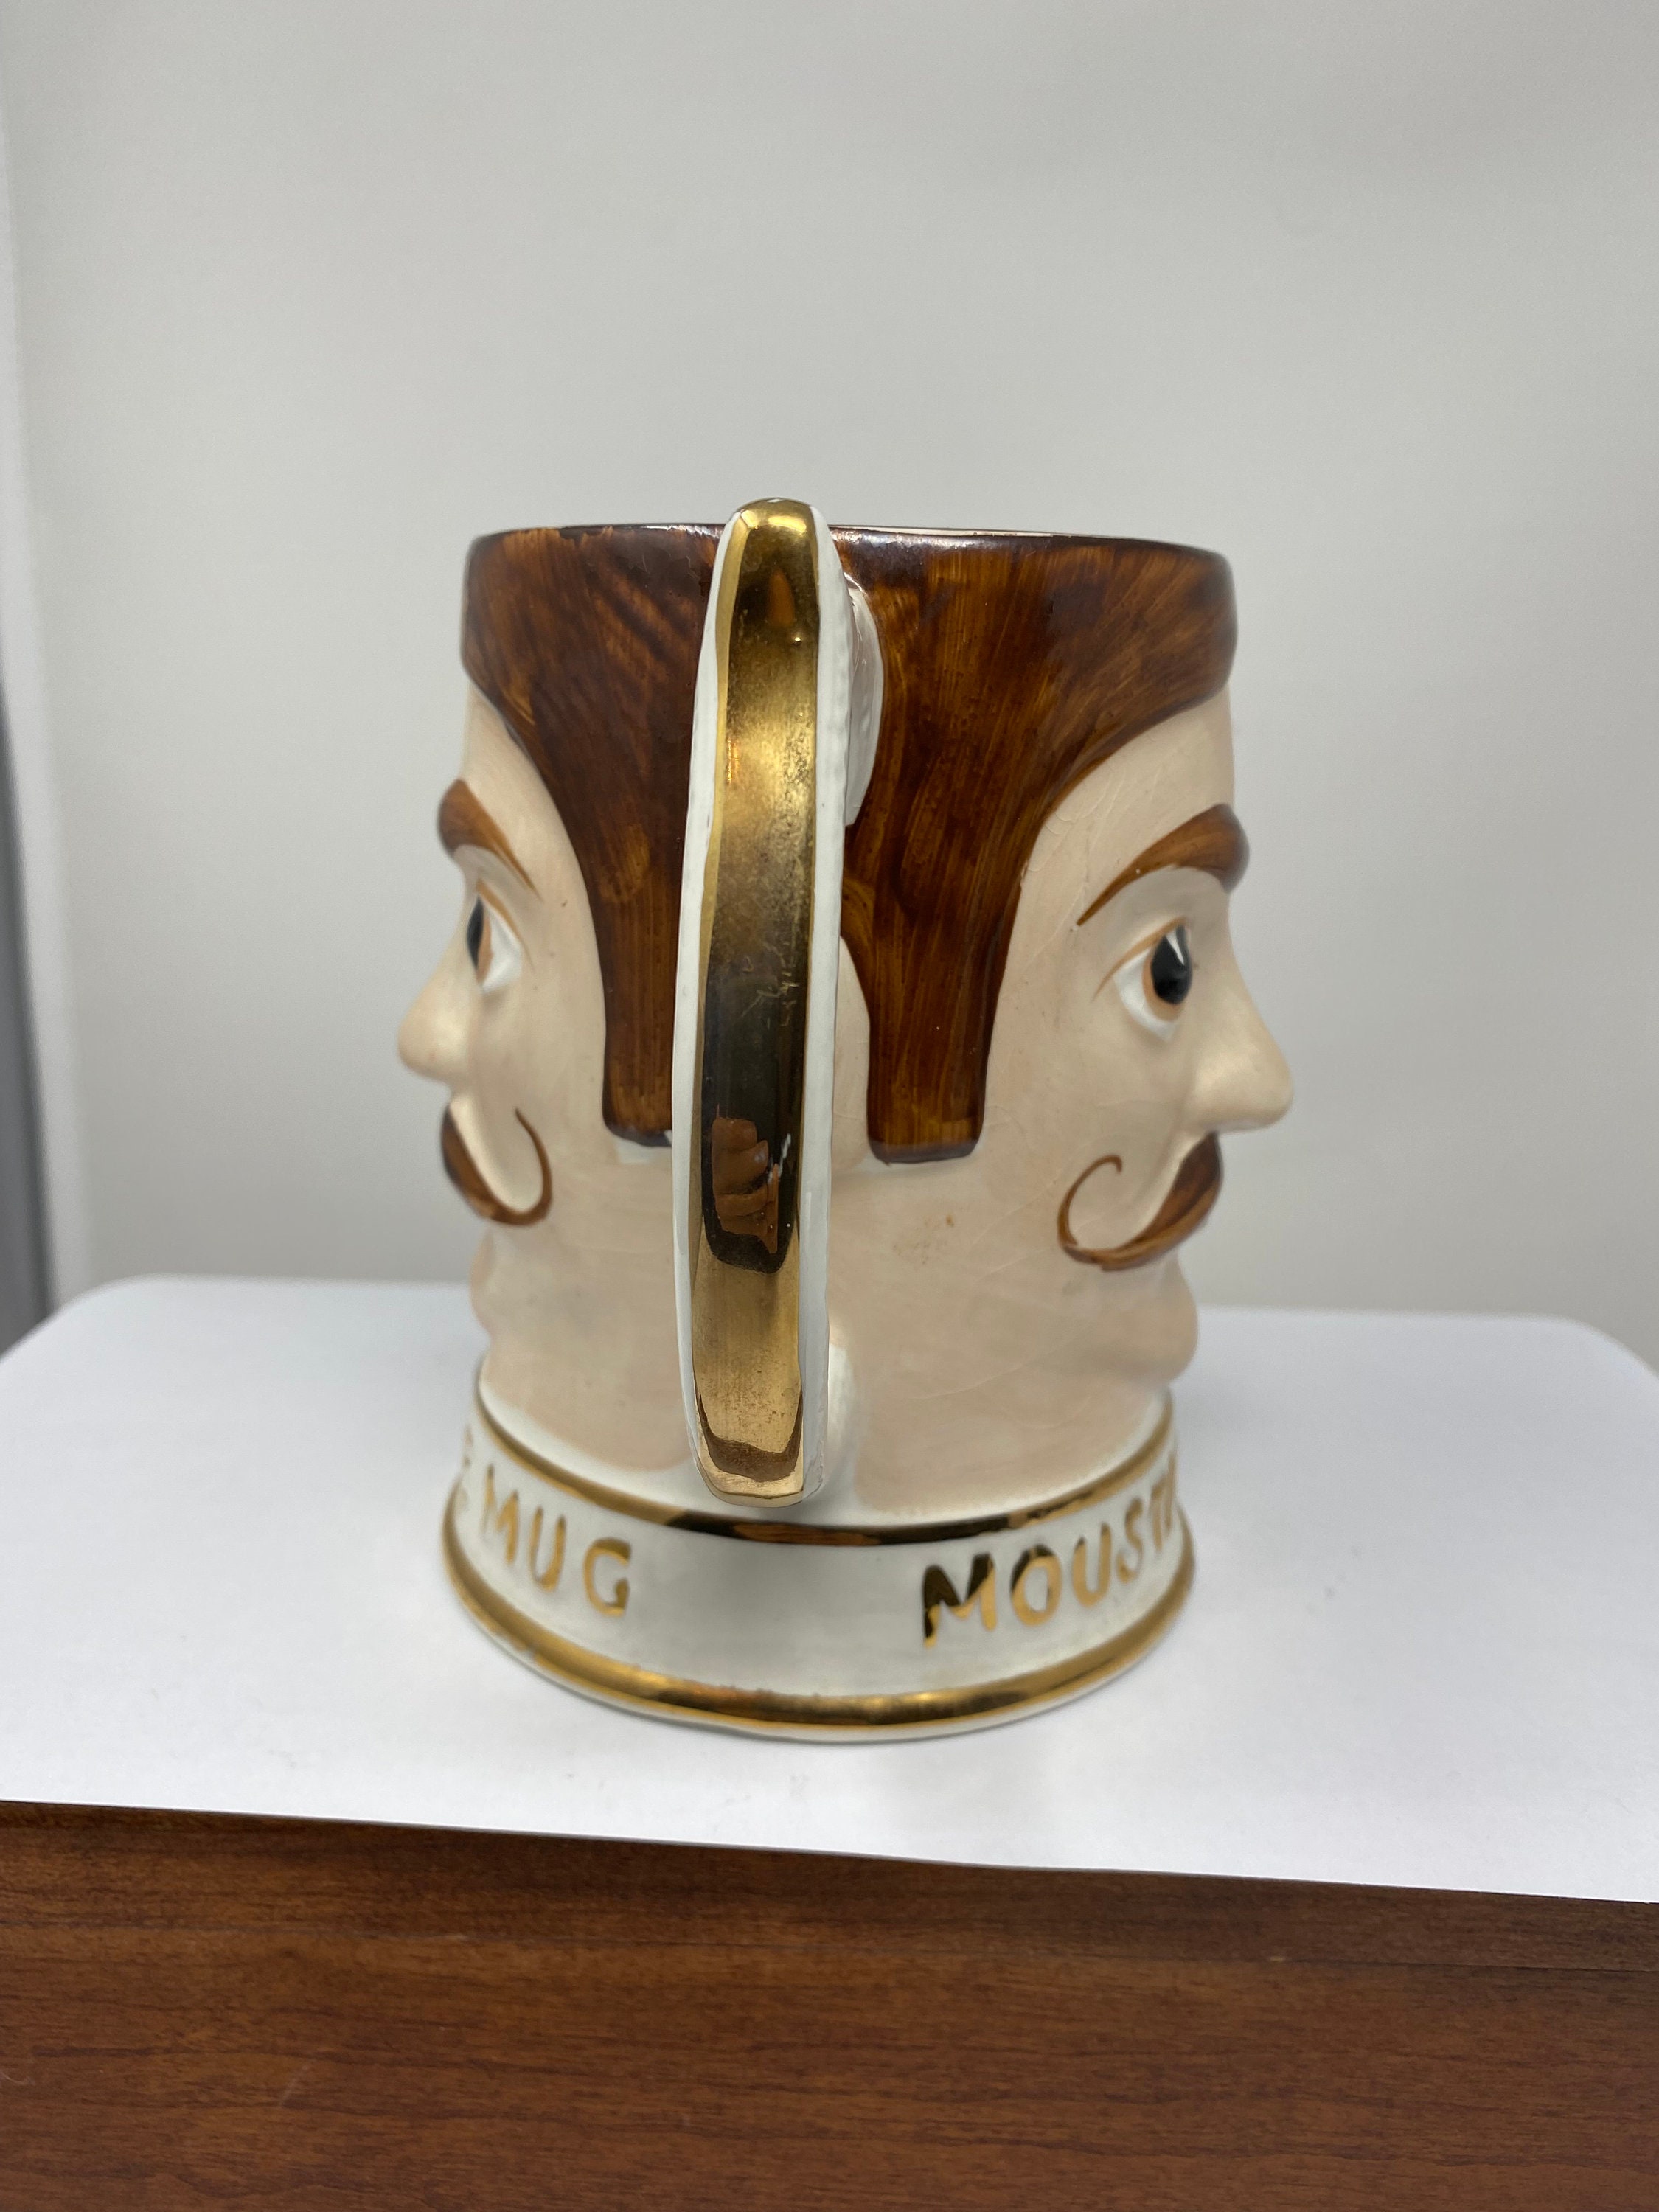 Vintage Mustache Man Face Mug for Sale in Tigard, OR - OfferUp